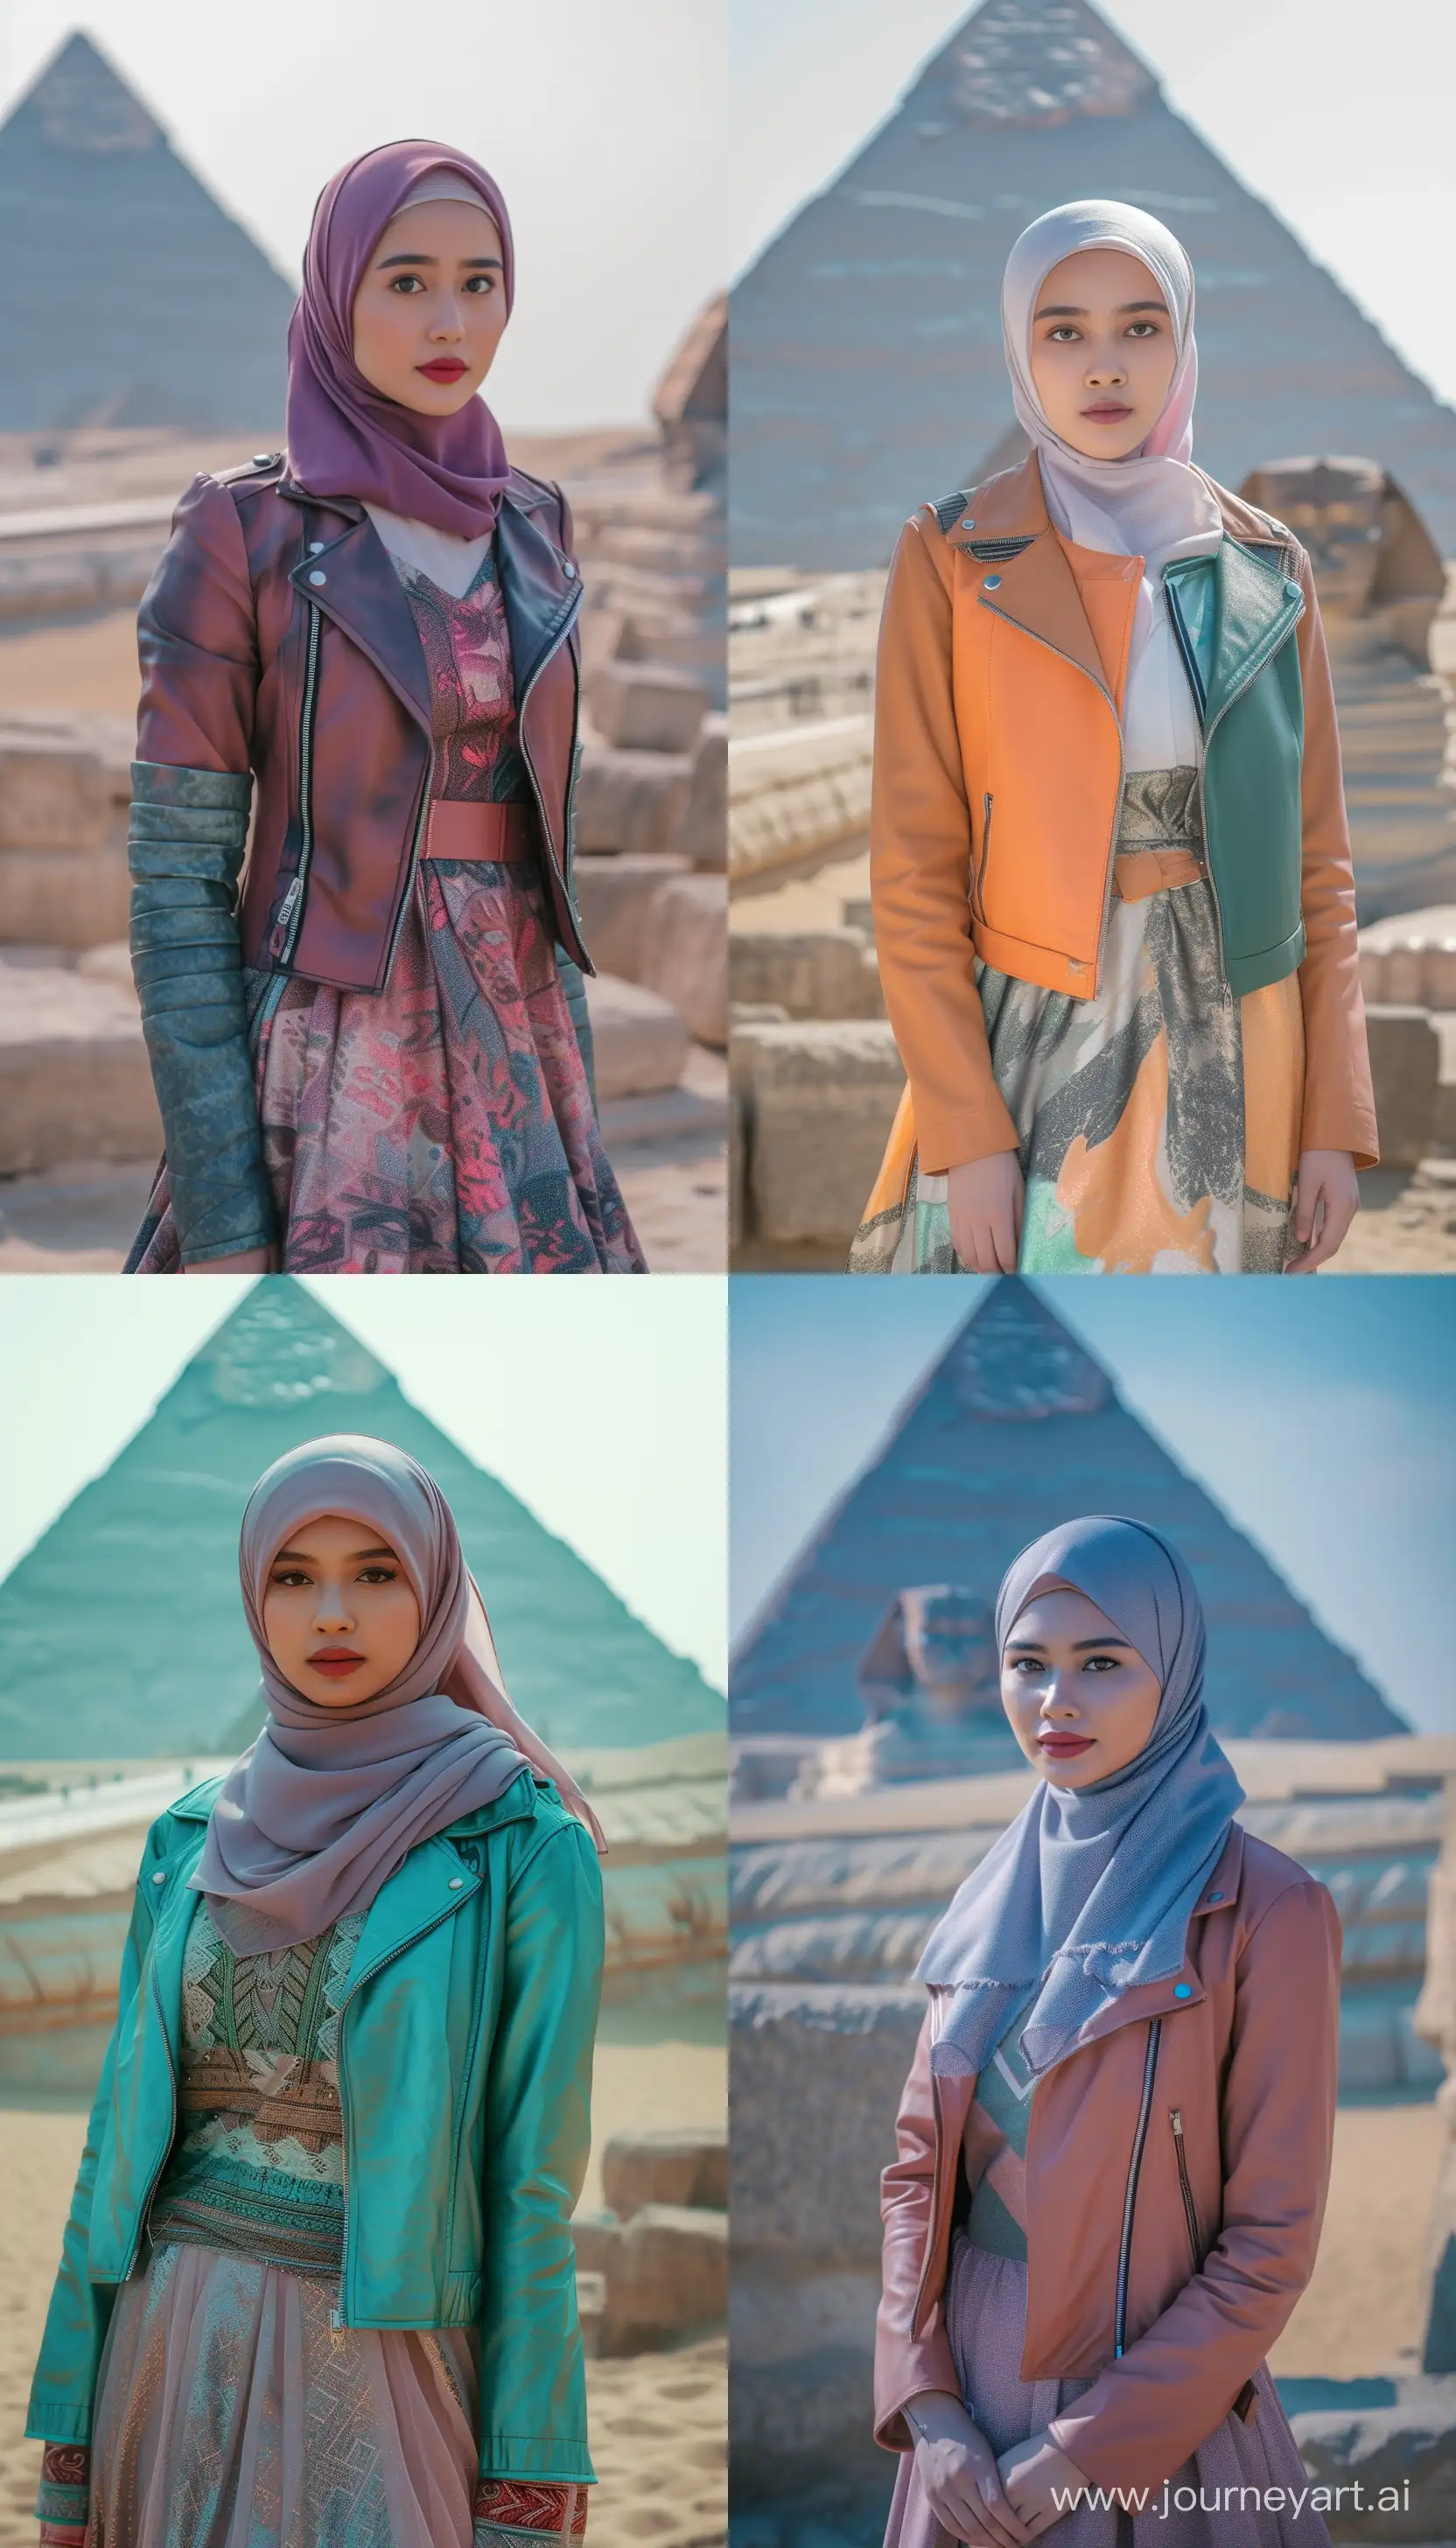 Stylish-Indonesian-Woman-in-Glitch-Color-Leather-Jacket-at-Great-Pyramid-Sphinx-Egypt